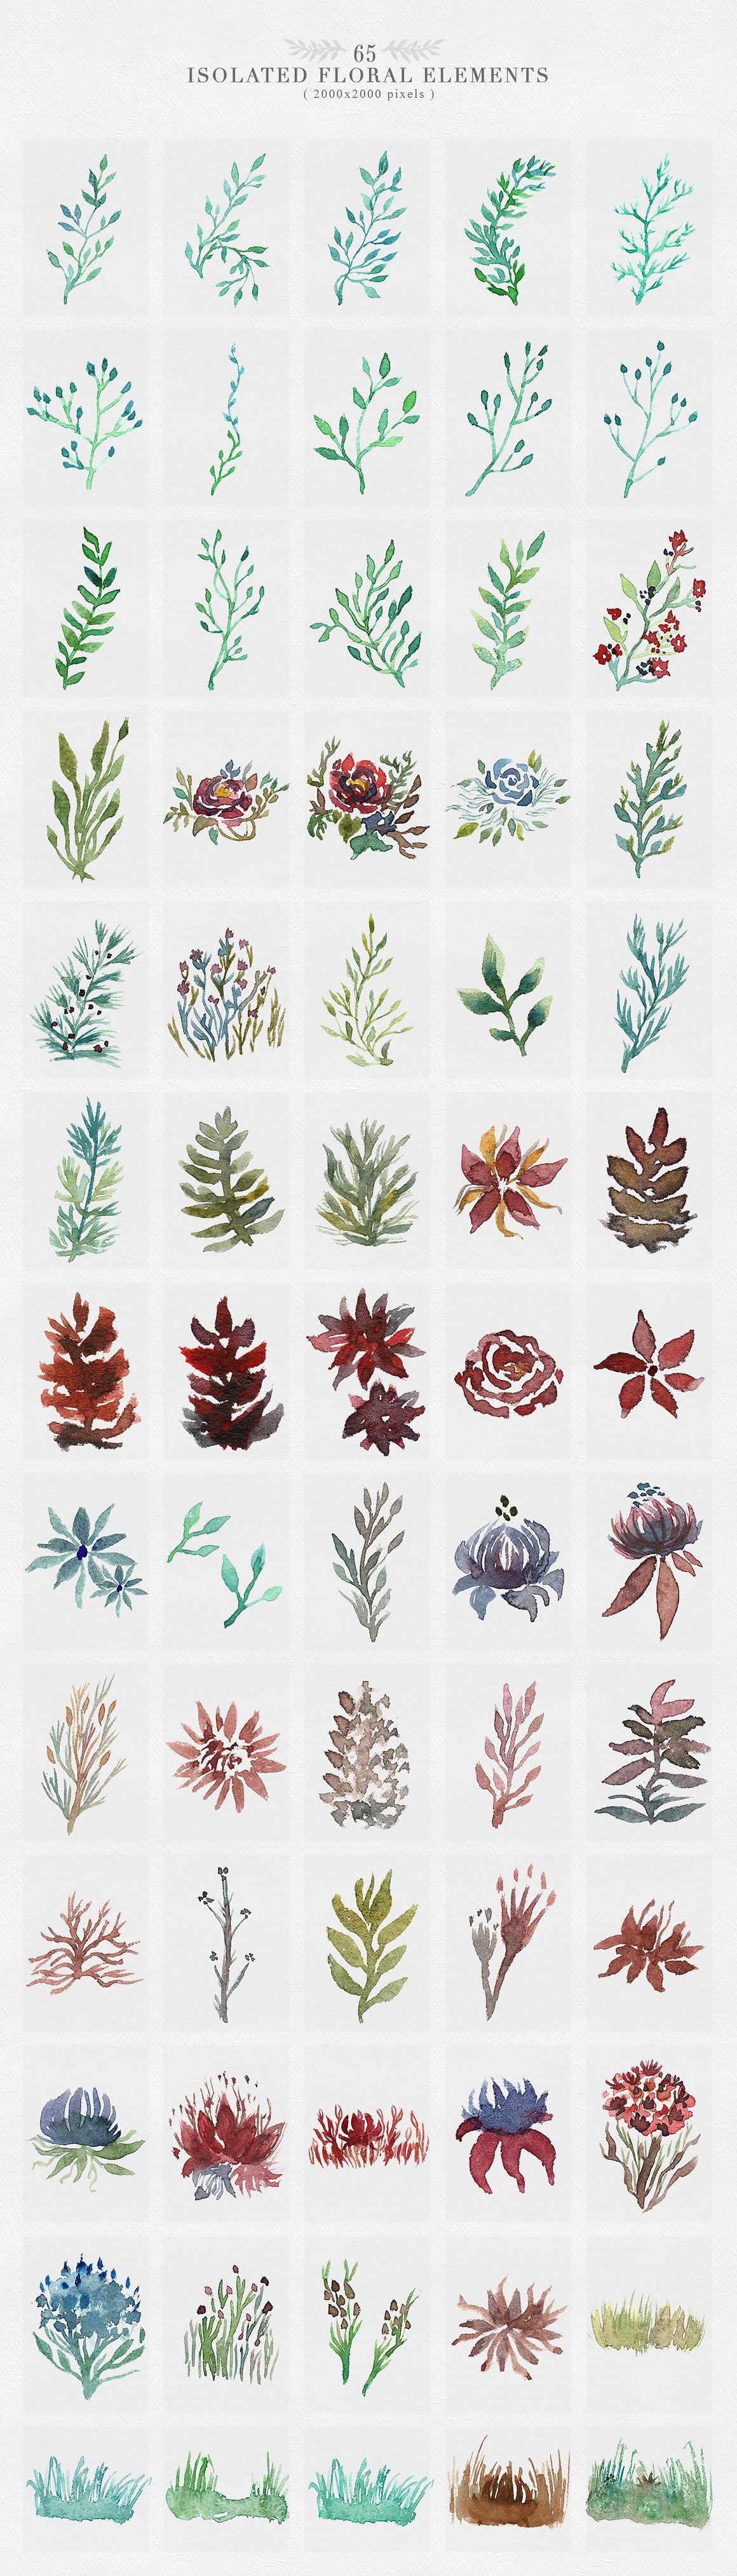 Isolated floral elements.